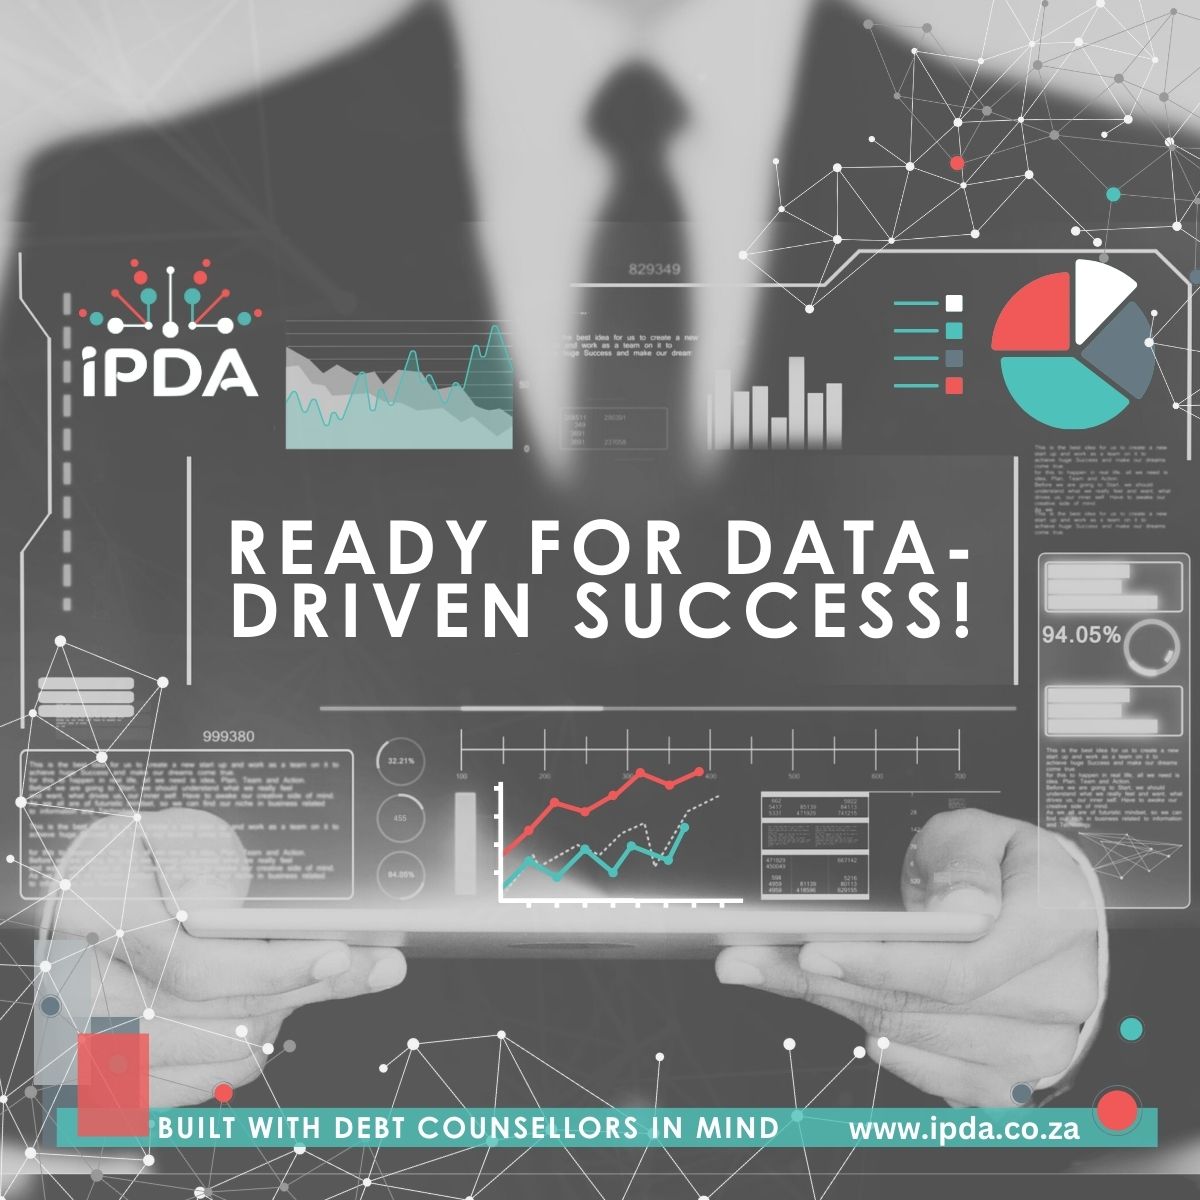 Ready for data-driven success! - iPDA